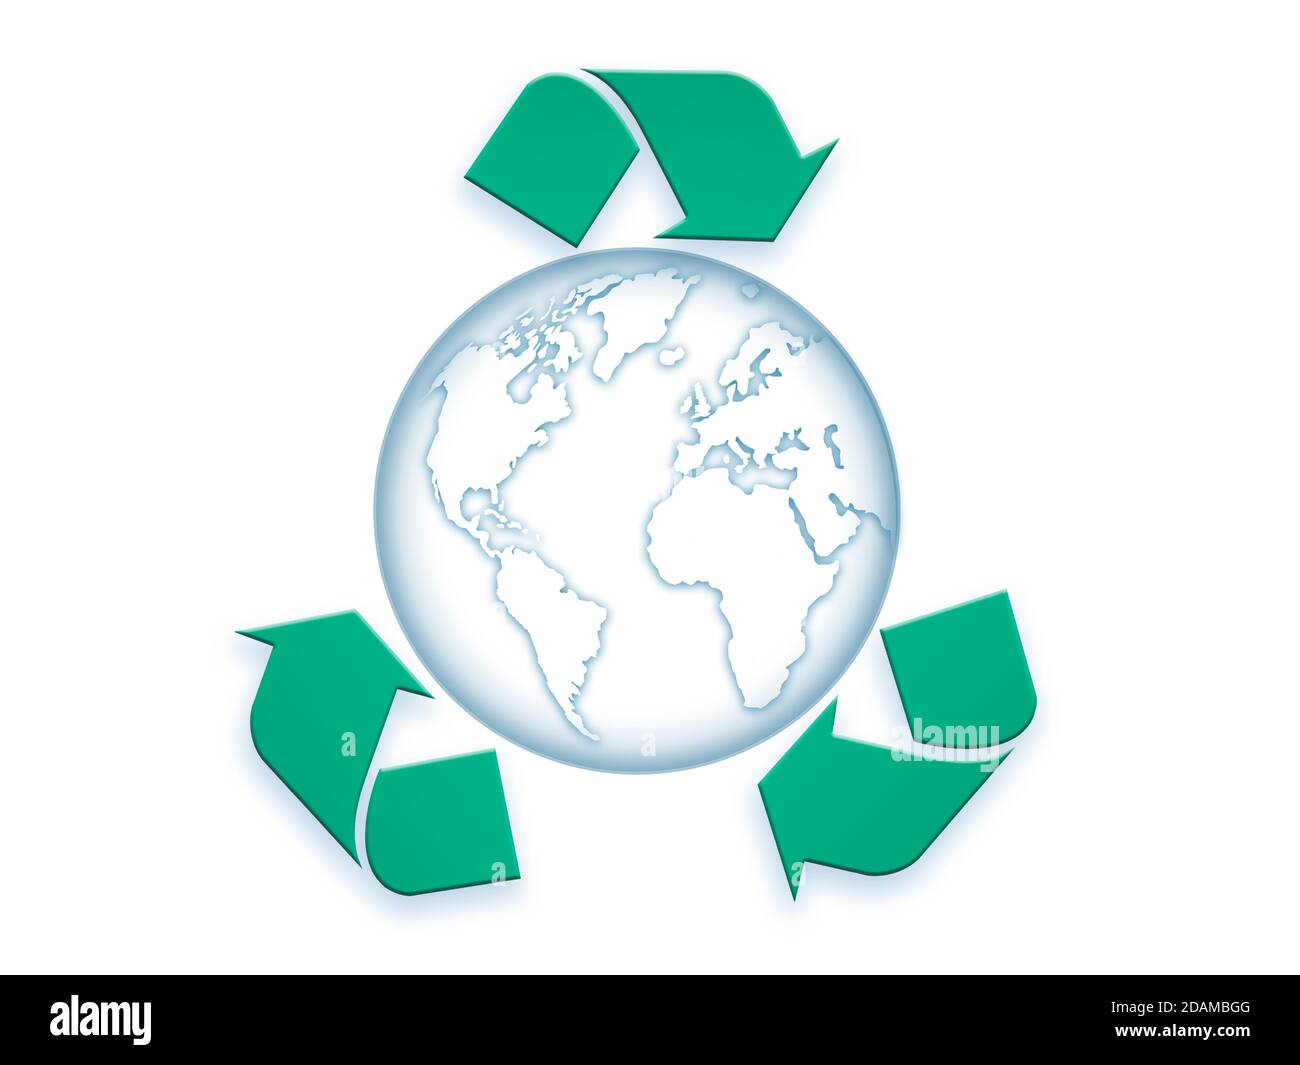 Earth surrounded by recycling symbol, illustration. Stock Photo